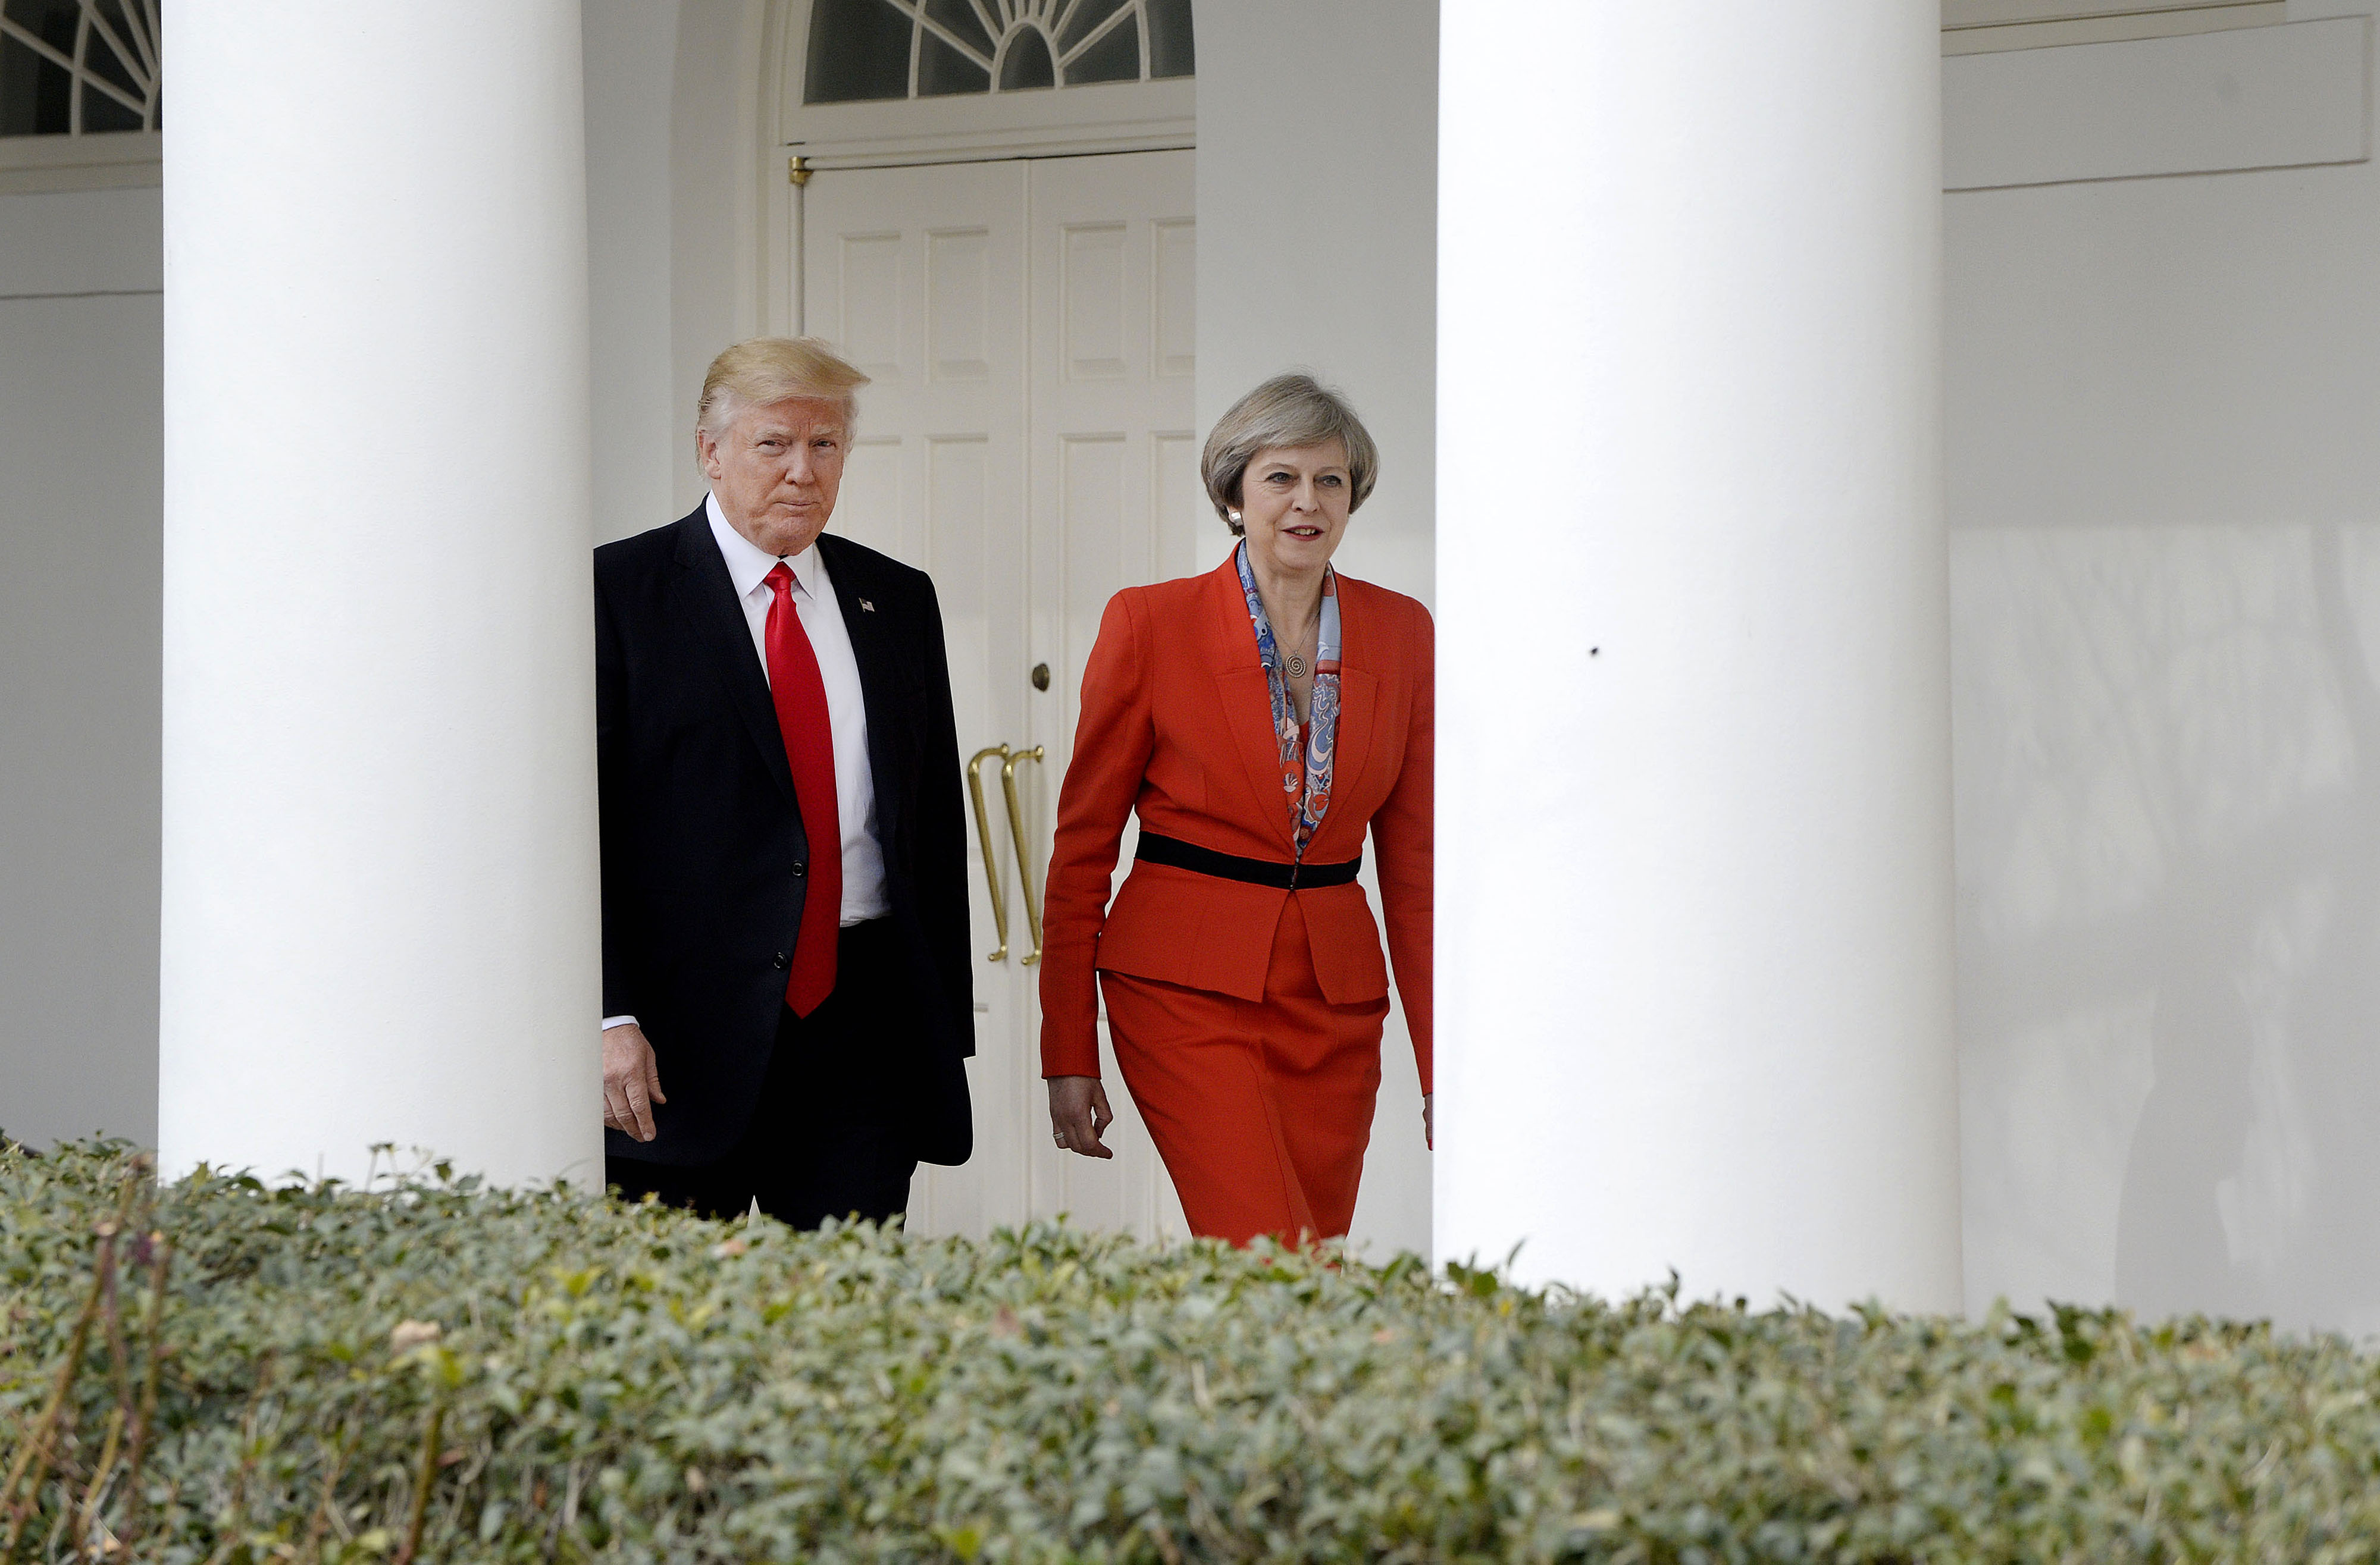 President Donald Trump, left, walks with Theresa May, U.K. prime minister, outside of the White House in Washington, on Jan. 27, 2017. (Olivier Douliery—Bloomberg/Getty Images)